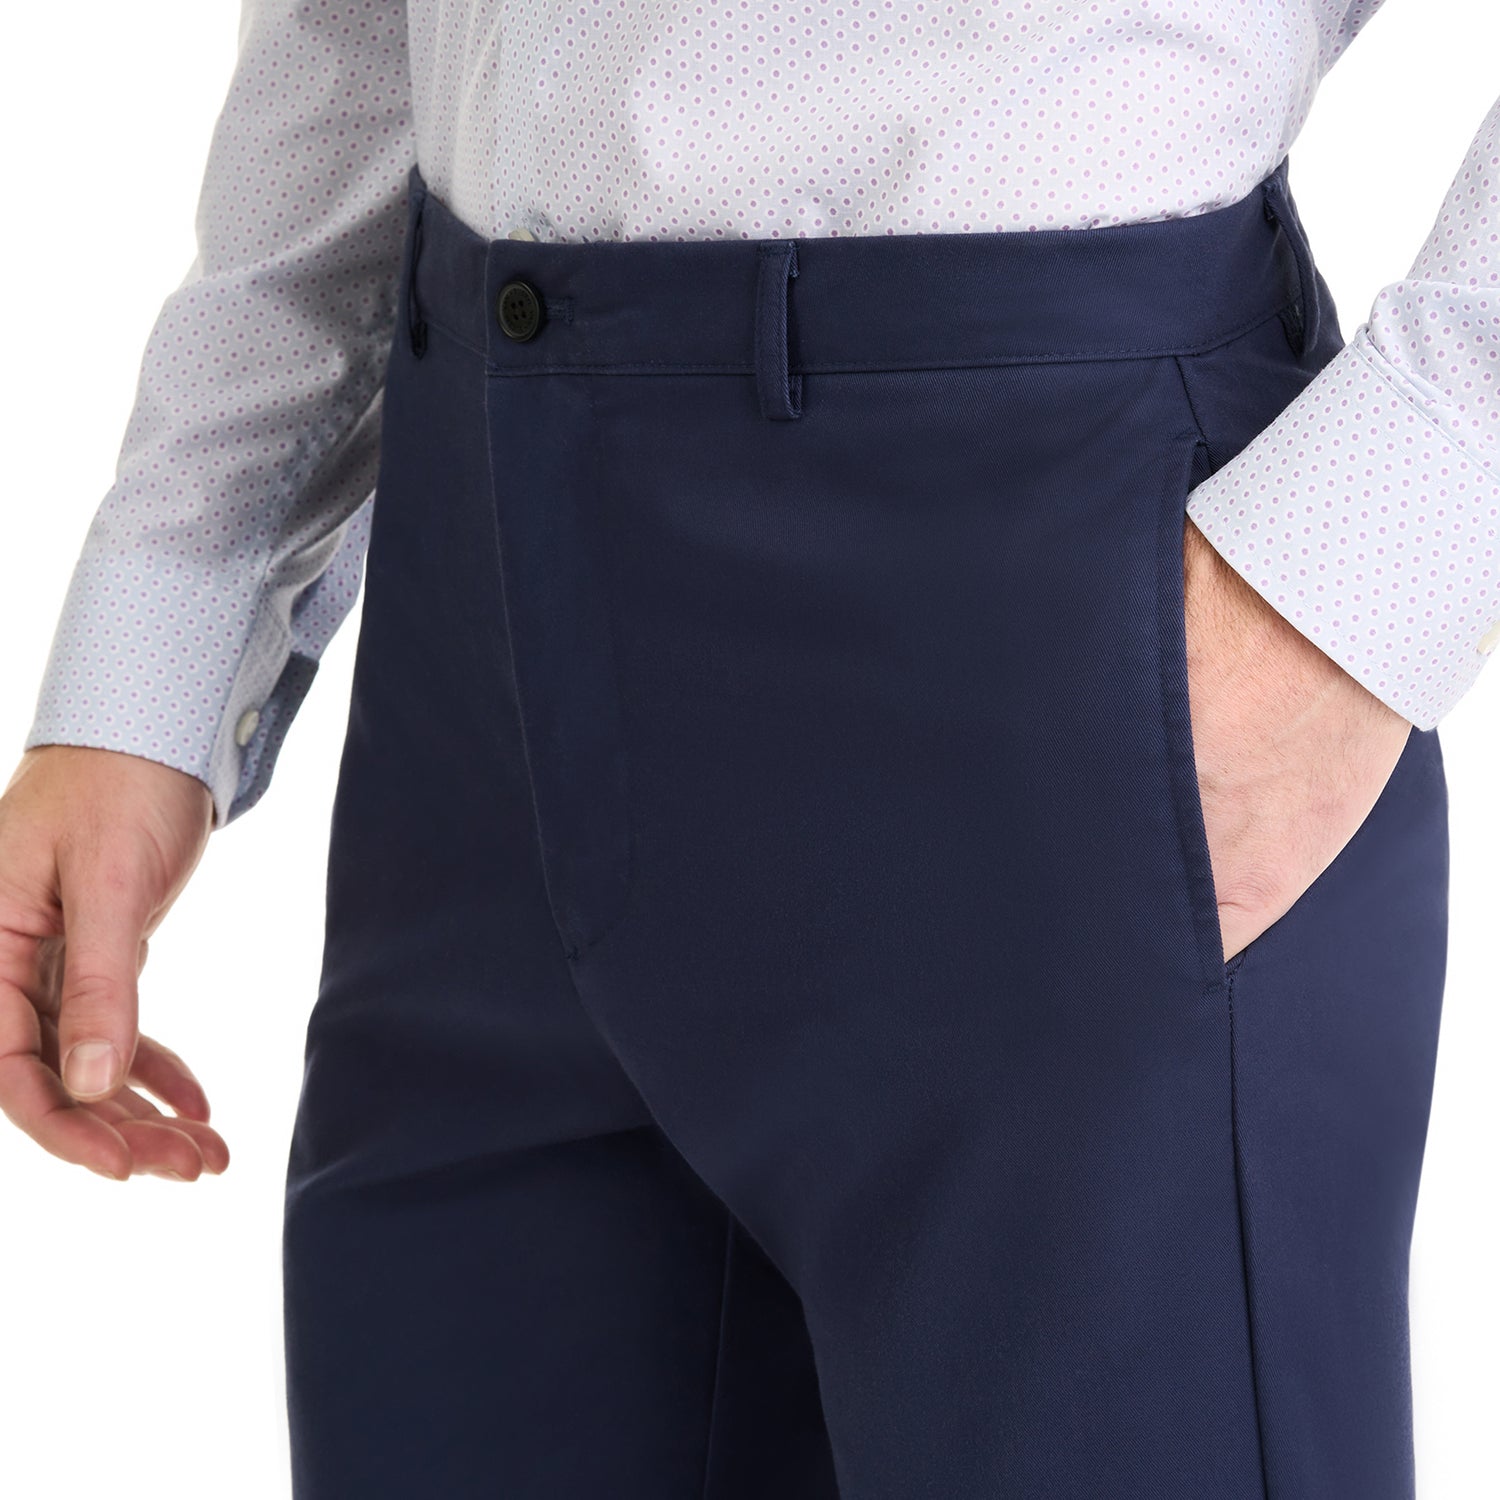 Essential Wrinkle Free Flat Front Straight Leg Pant - Blue